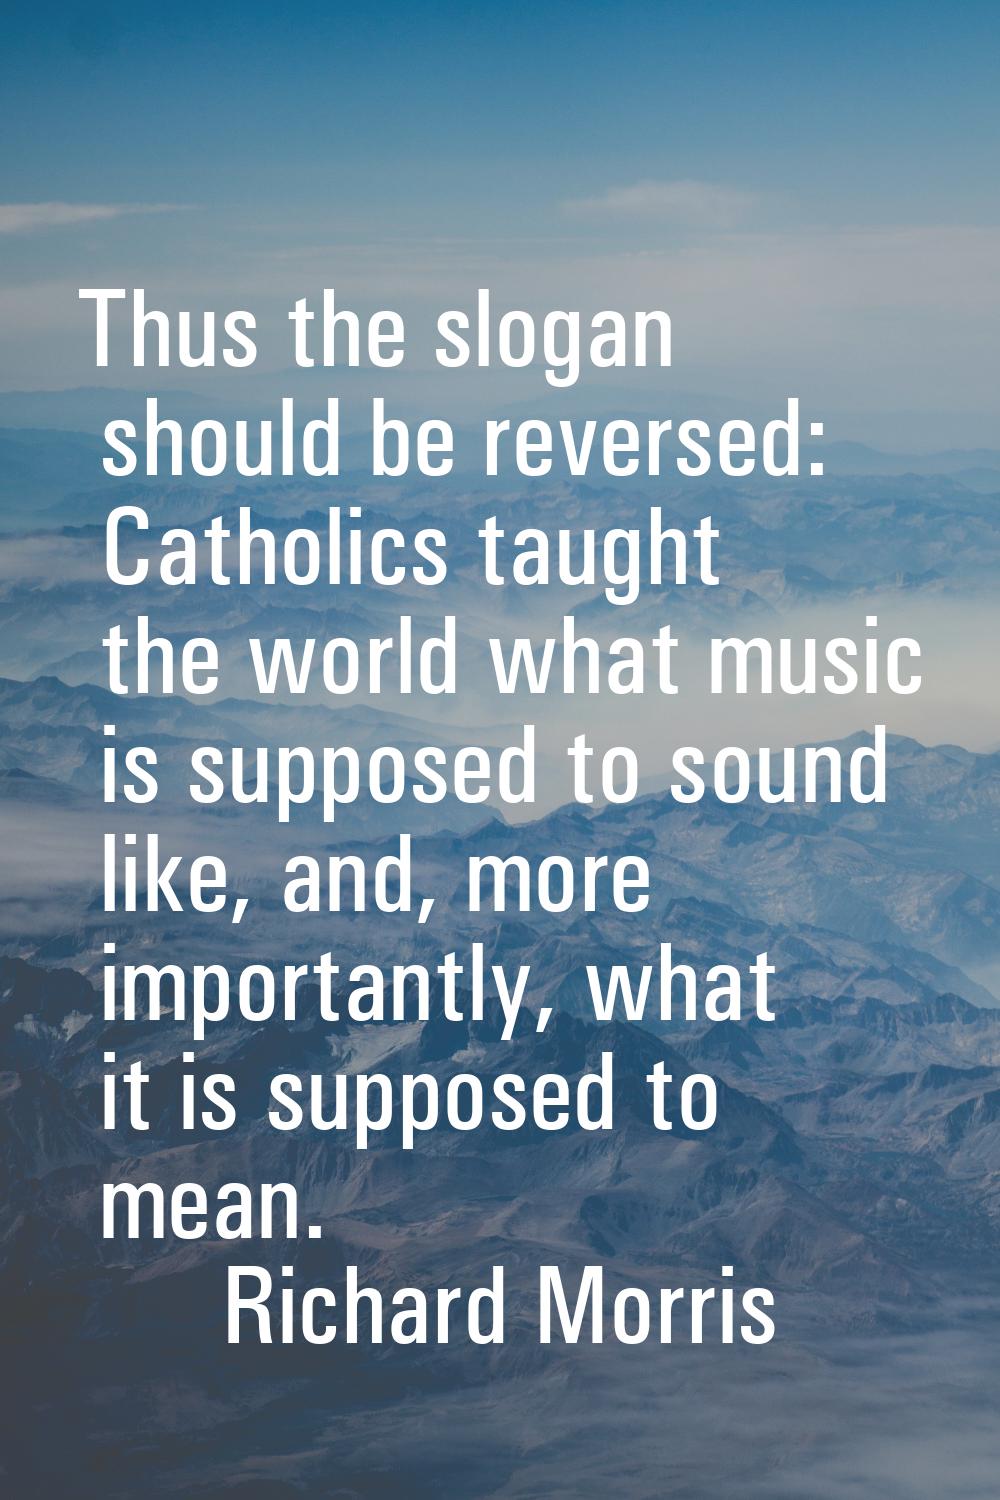 Thus the slogan should be reversed: Catholics taught the world what music is supposed to sound like